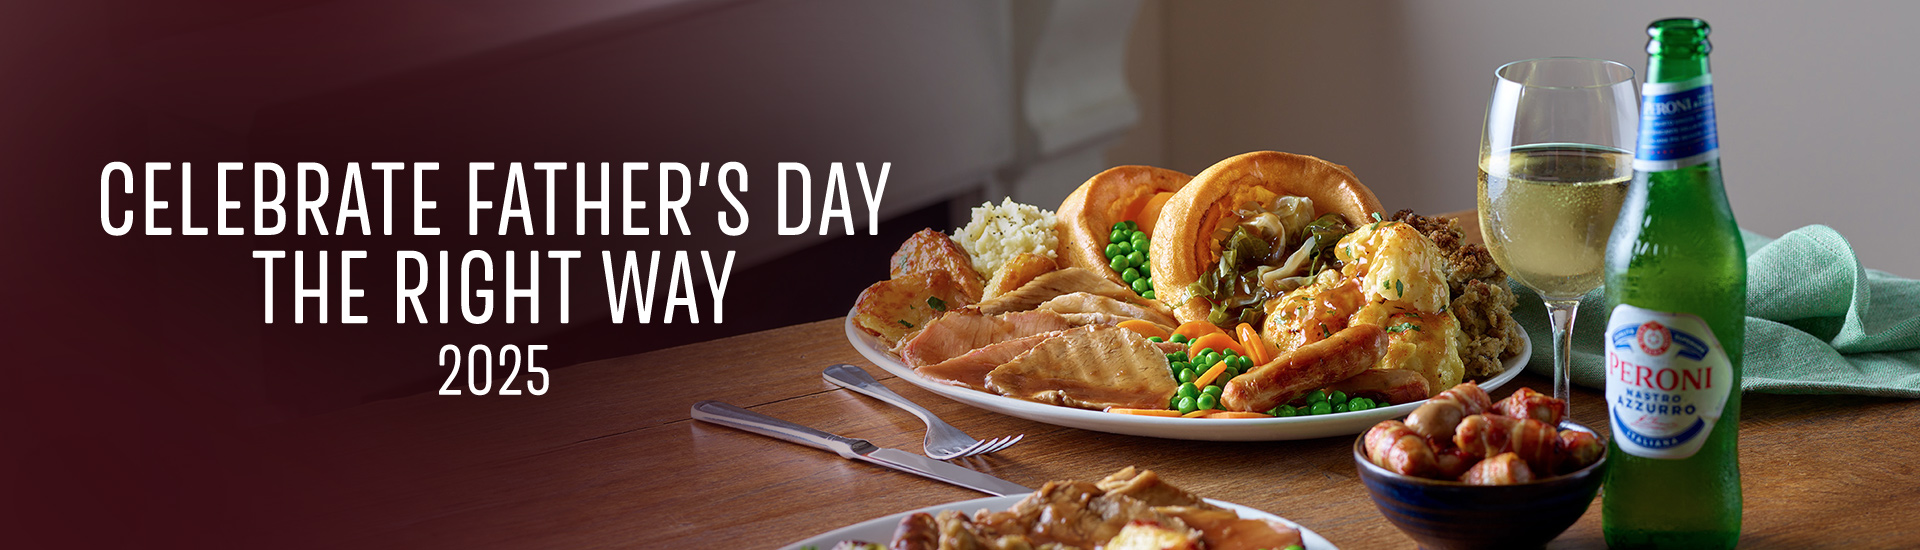 Father’s day carvery in Enfield